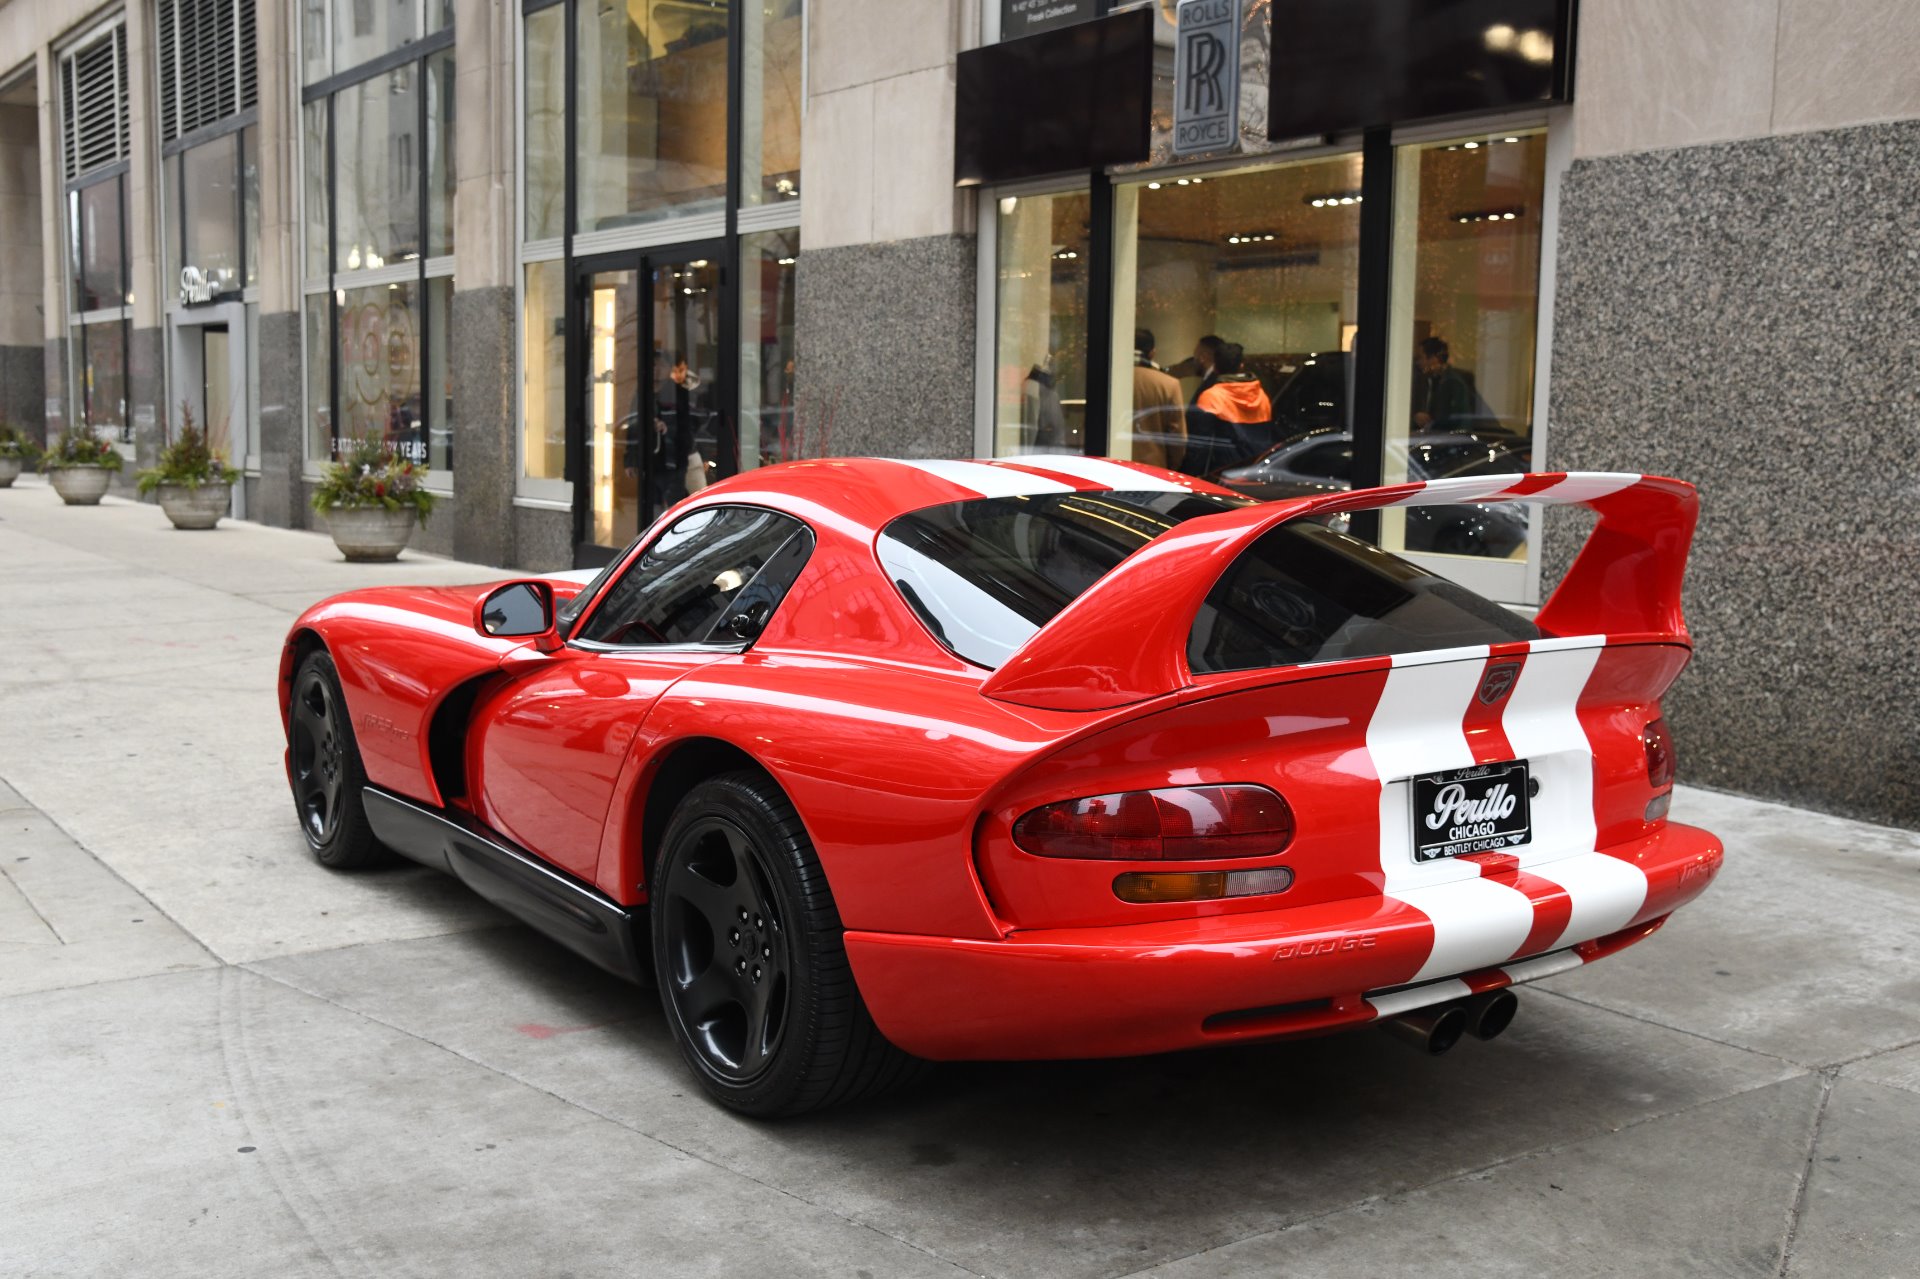 Used 2002 Dodge Viper GTS For Sale (Sold)